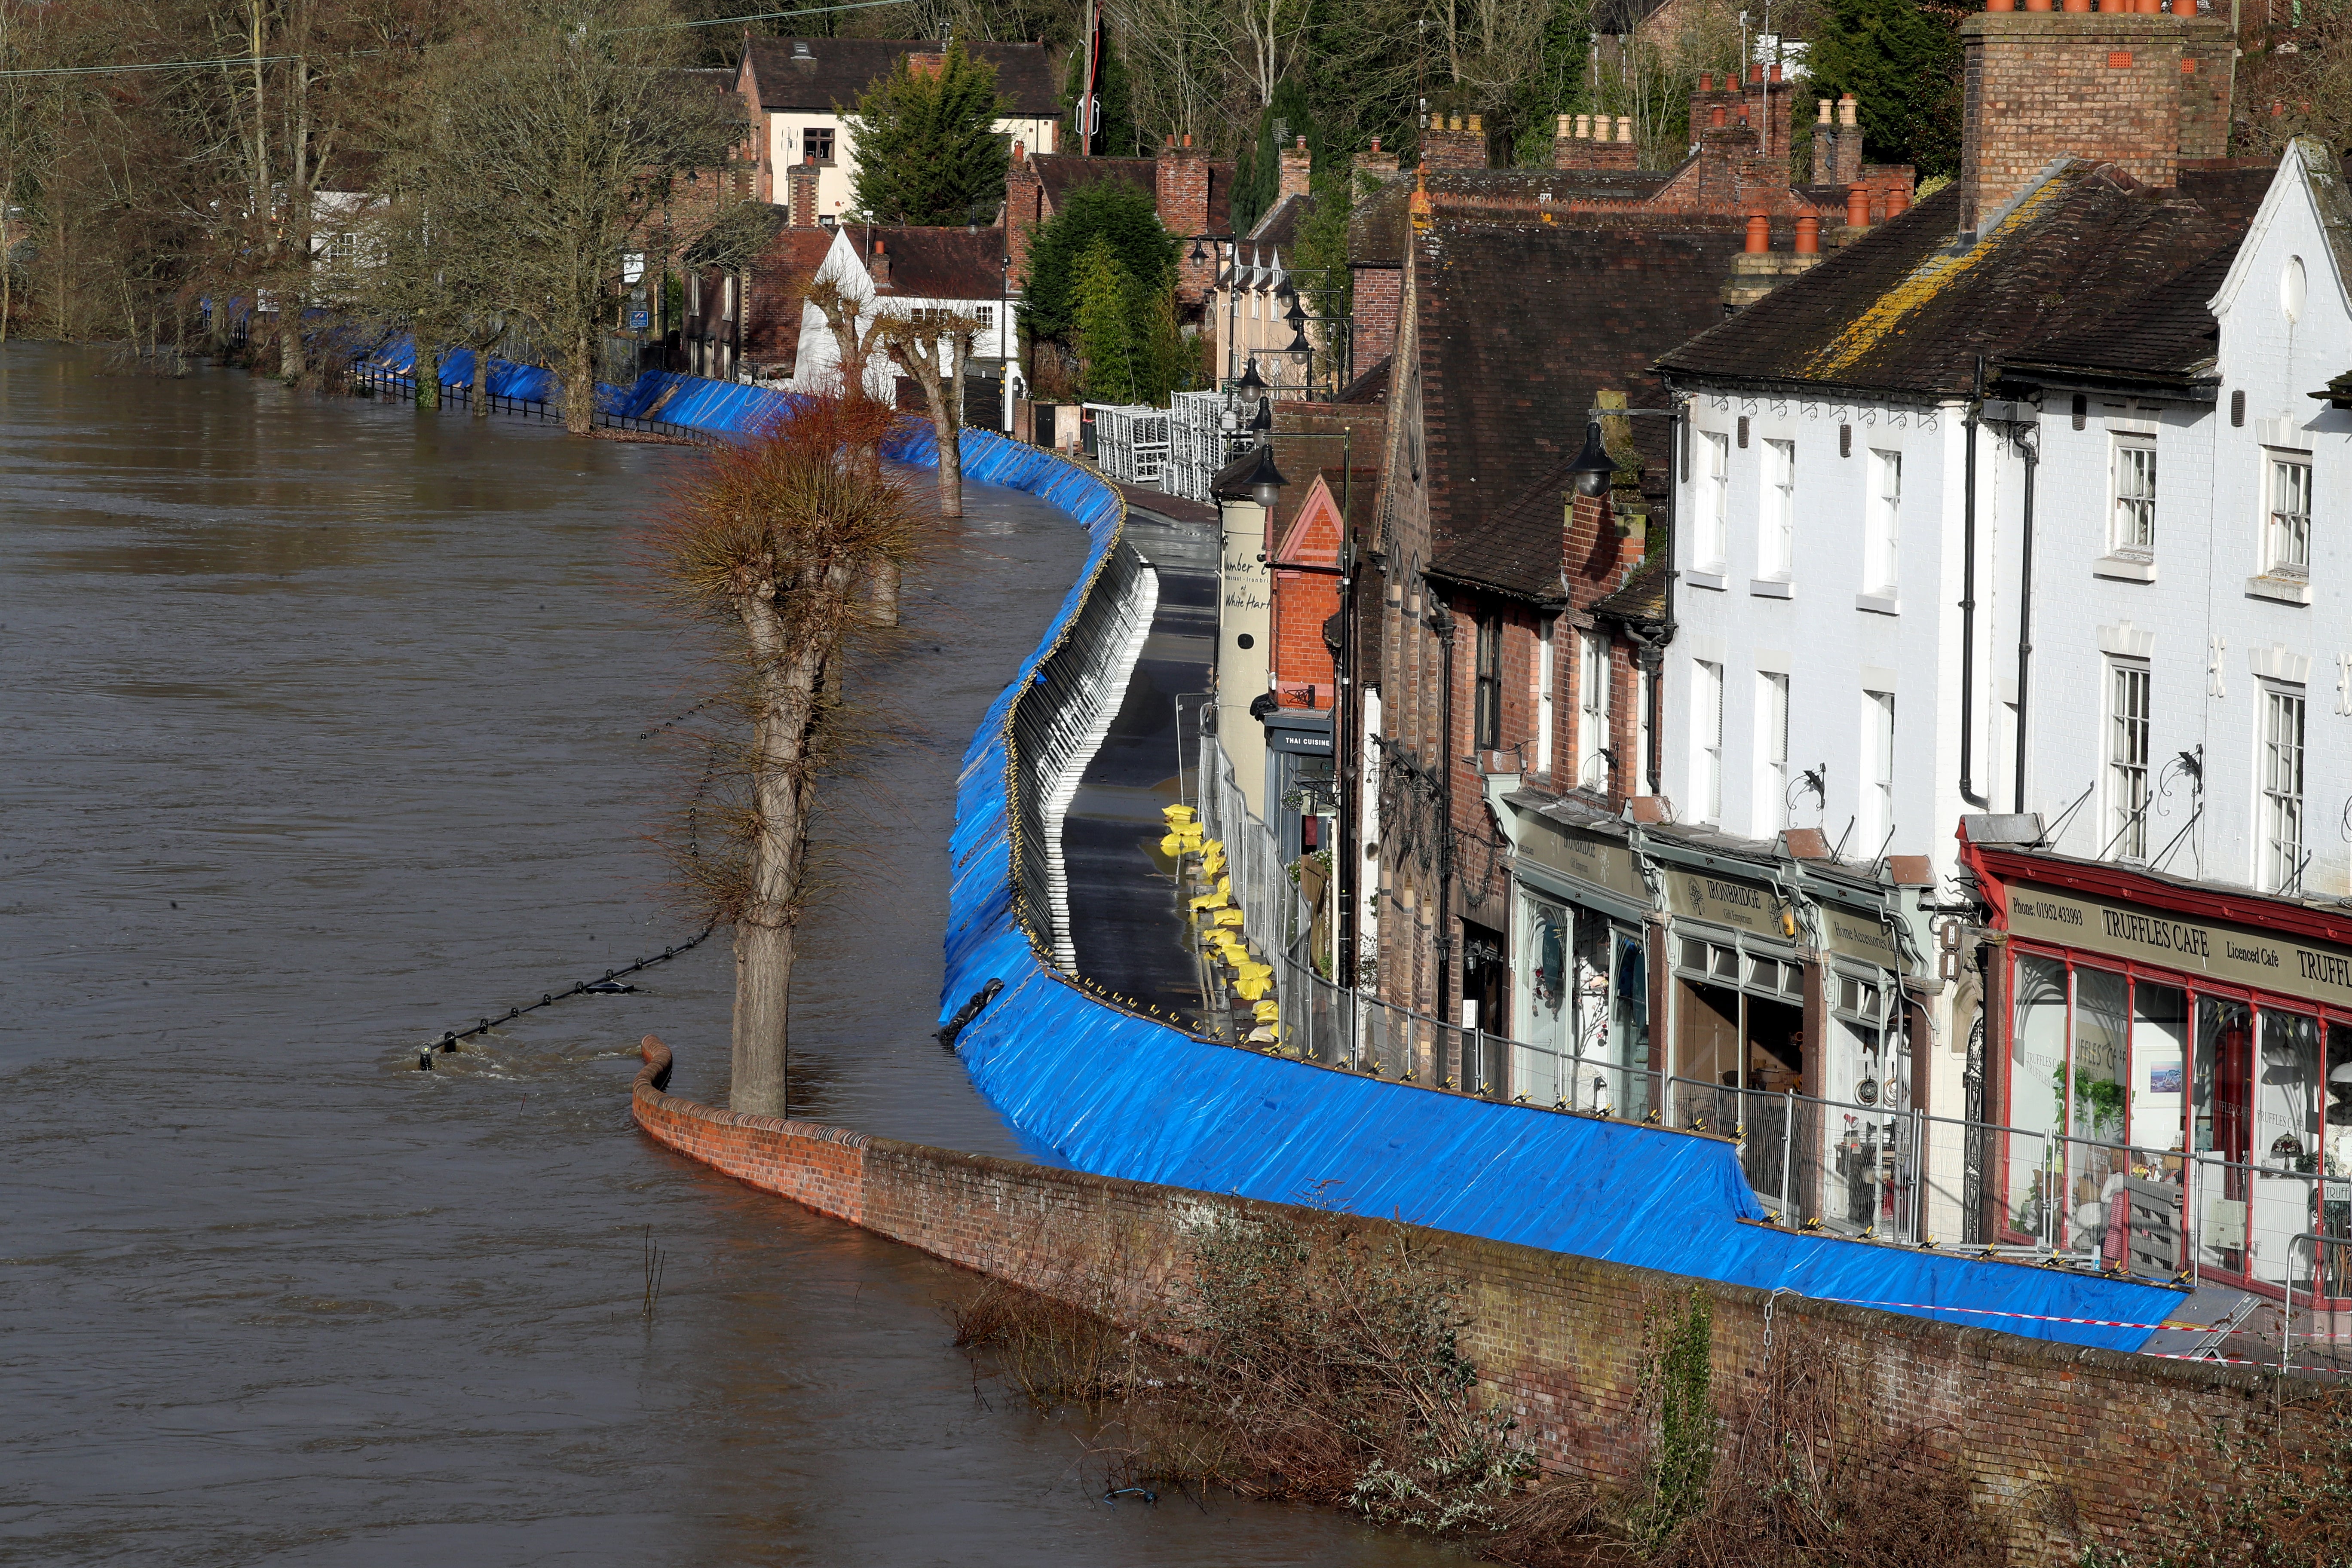 Flood defences along the Wharfage next to the River Severn following high winds and wet weather in Ironbridge (Nick Potts/PA)